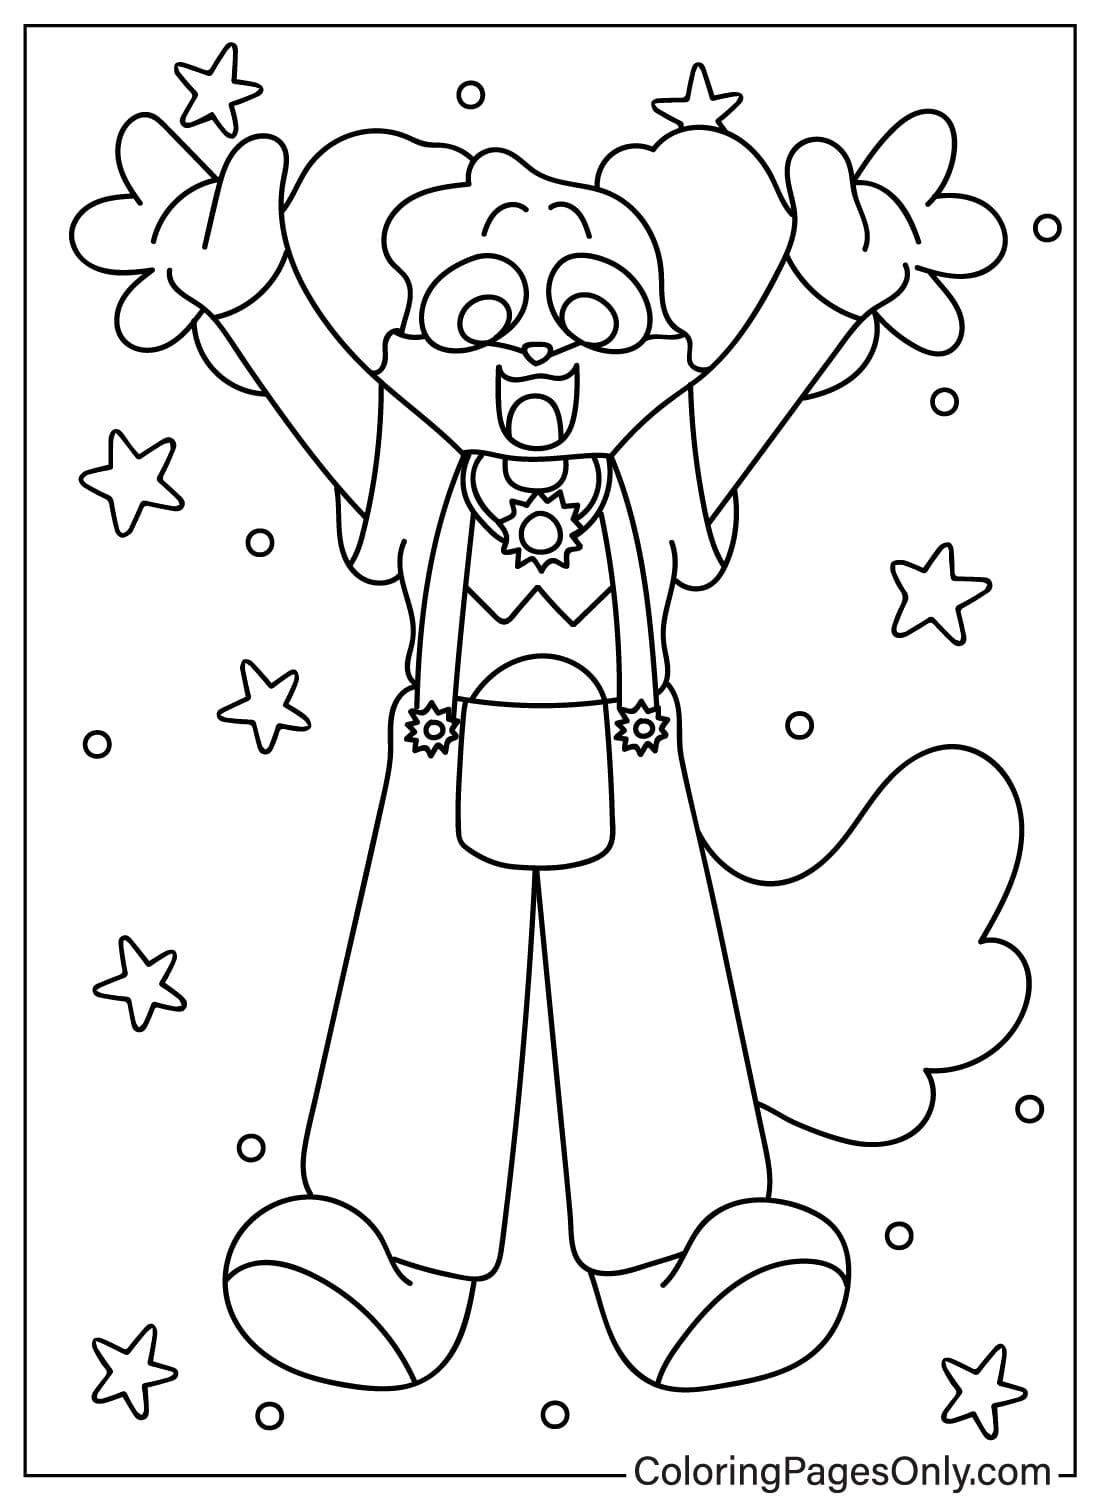 DogDay Free Coloring Page from DogDay